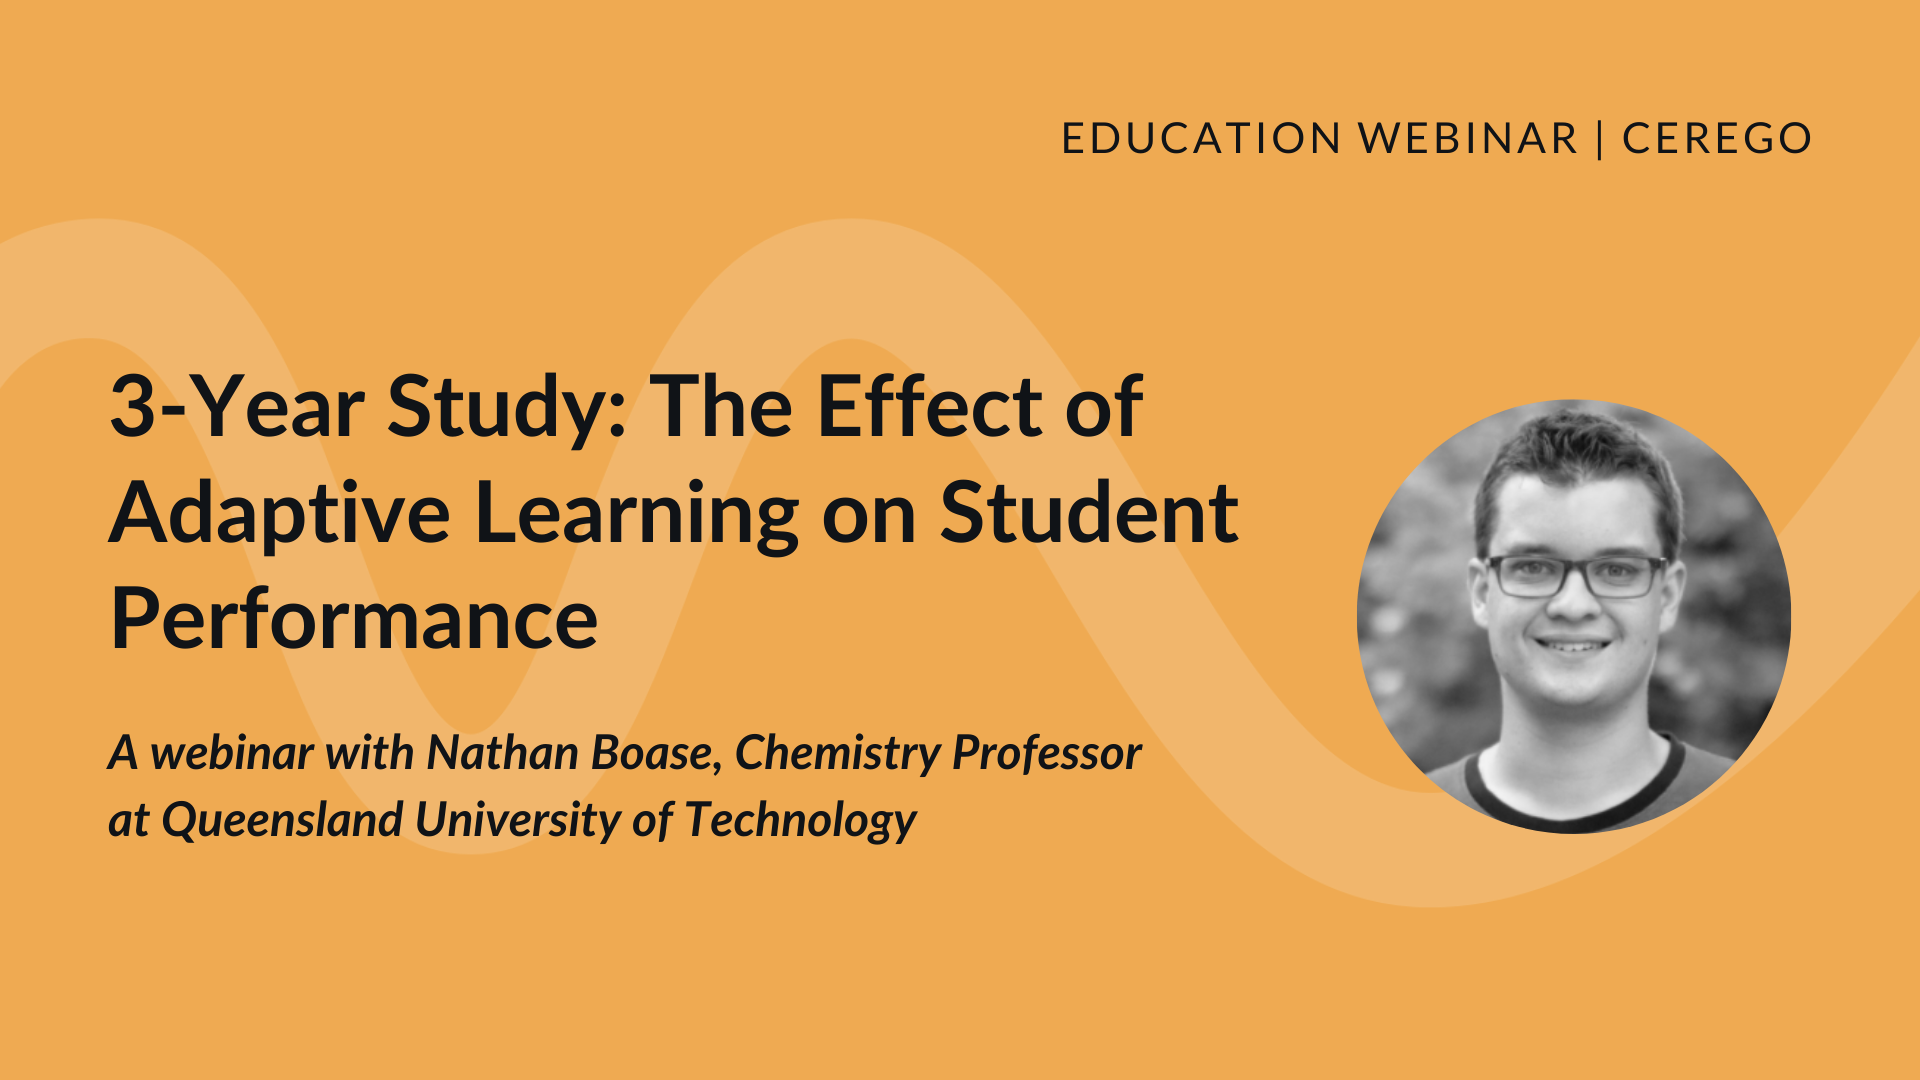 3-Year Study: The Effect of Adaptive Learning on Student Performance | Cerego Webinar